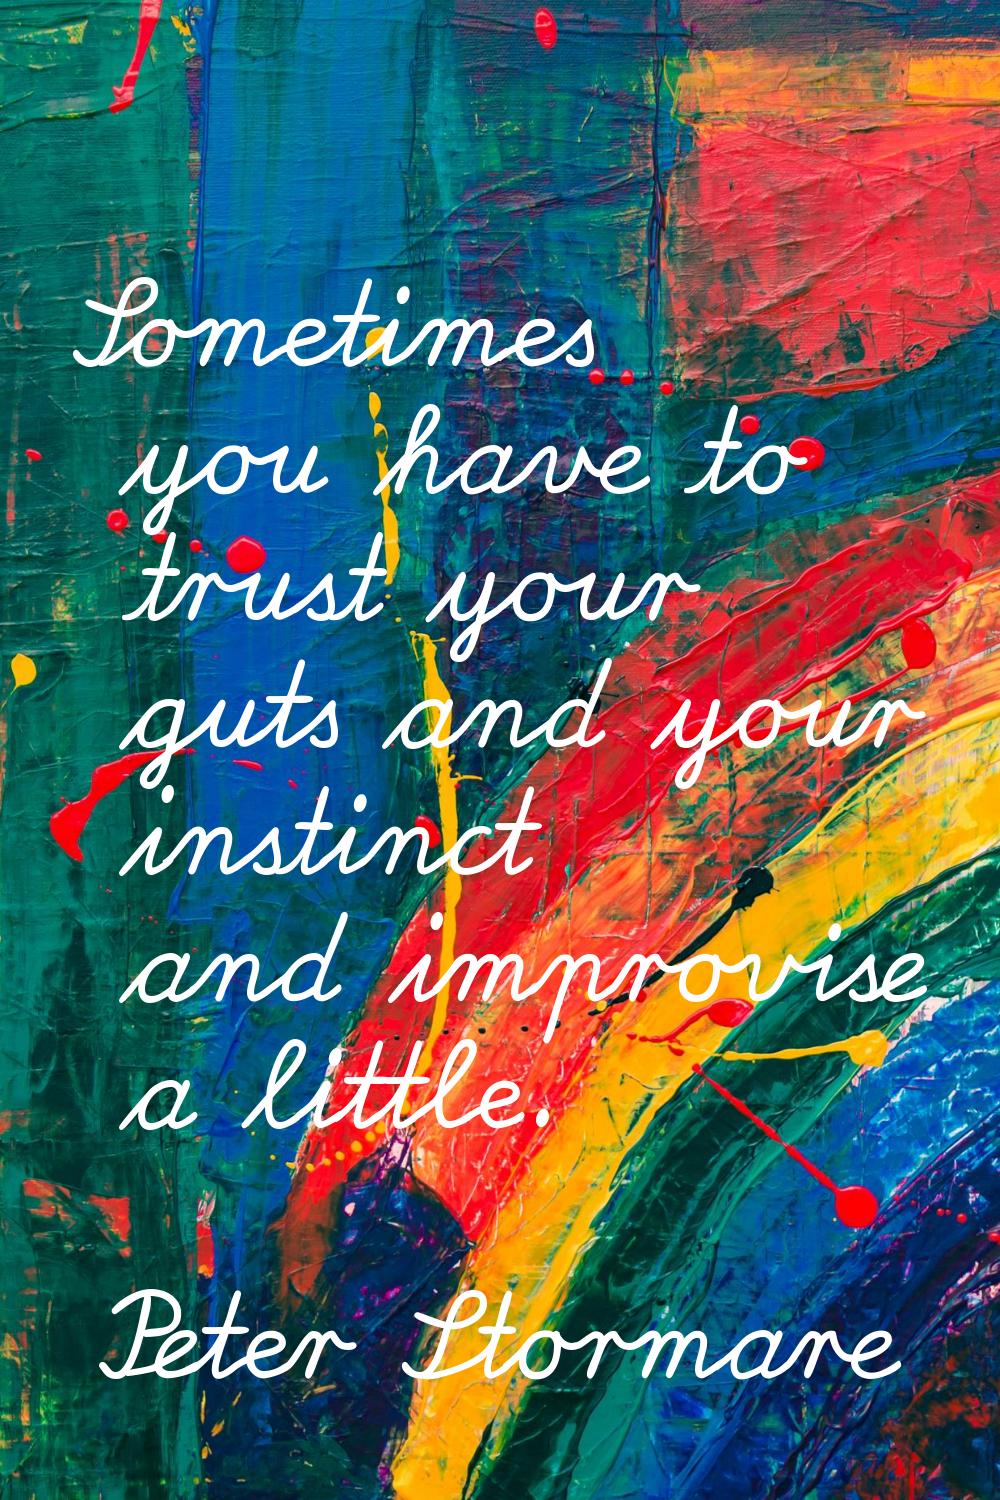 Sometimes you have to trust your guts and your instinct and improvise a little.